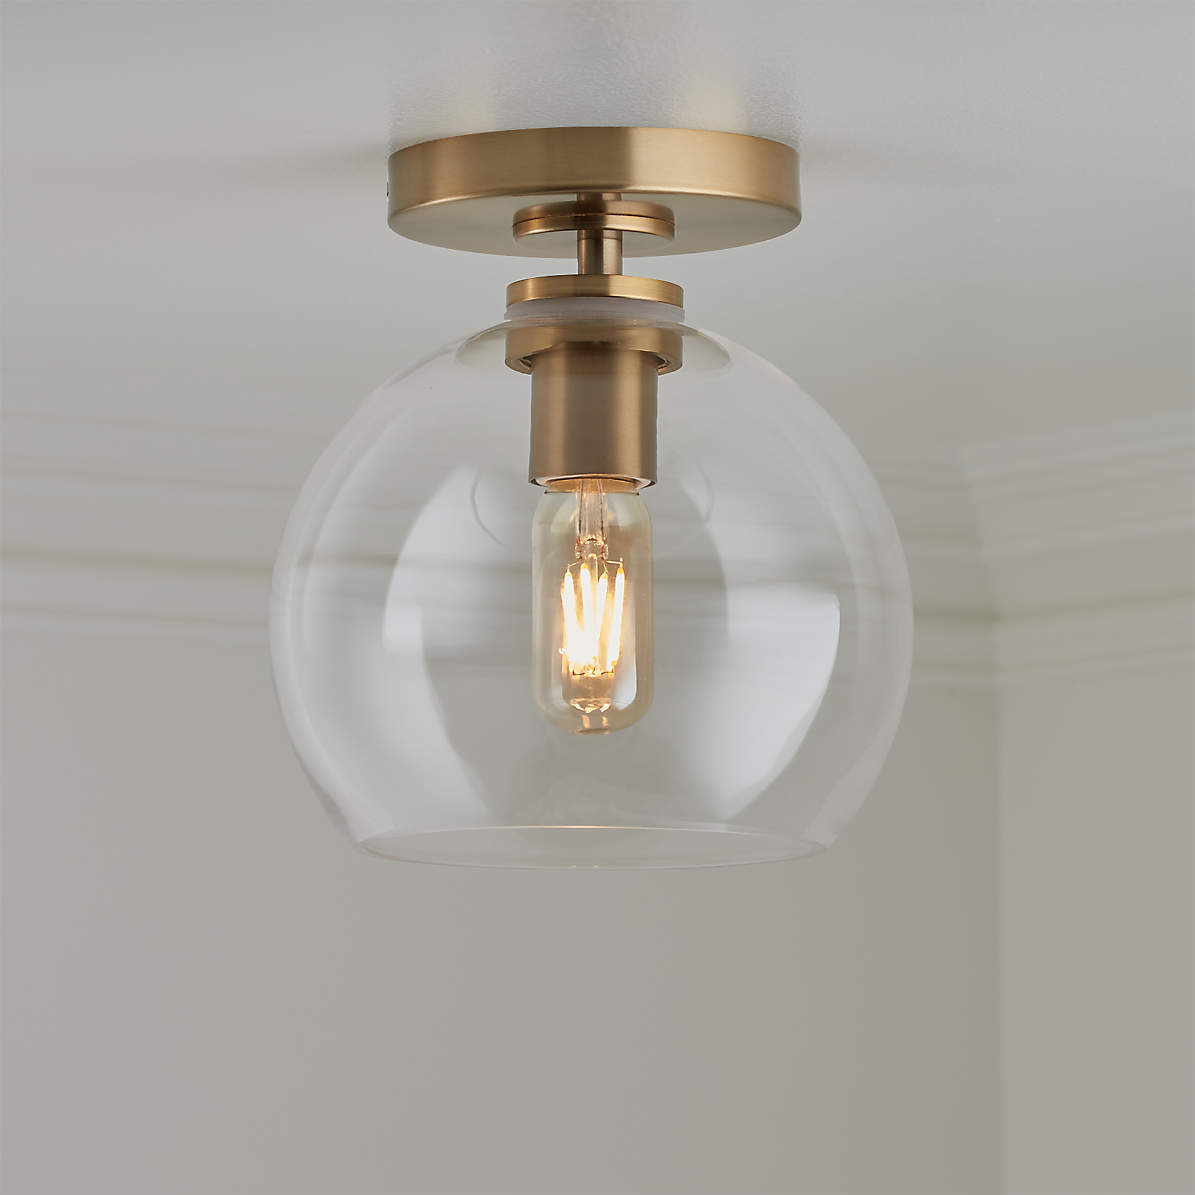 Arren Brass Chandelier Light with Round Clear Glass Shades + Reviews